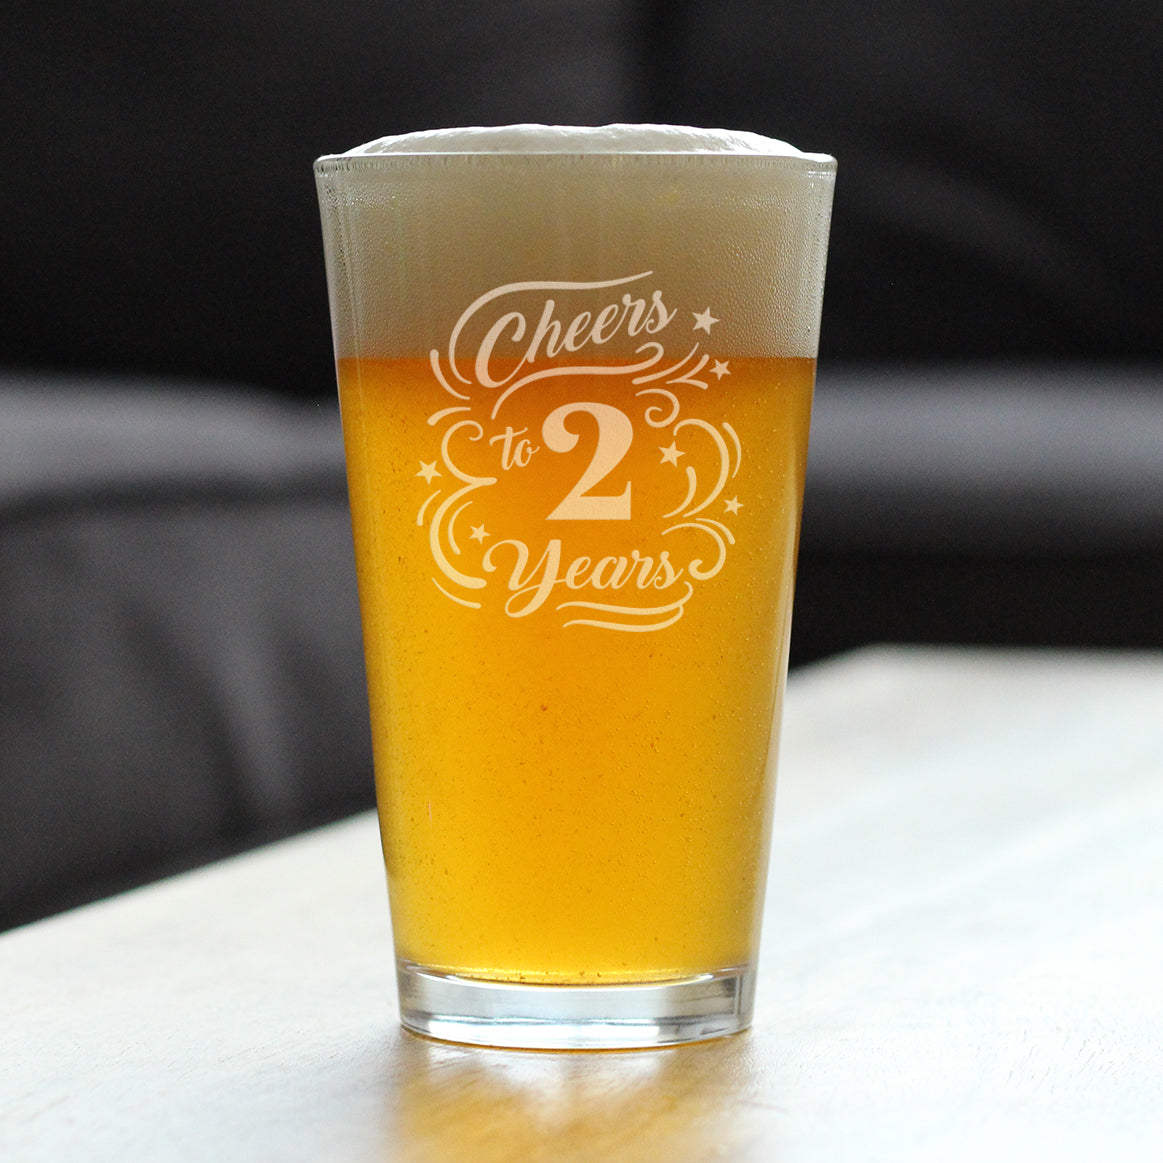 Cheers to 2 Years - Pint Glass for Beer - Gifts for Women &amp; Men - 2nd Anniversary Party Decor - 16 Oz Glasses